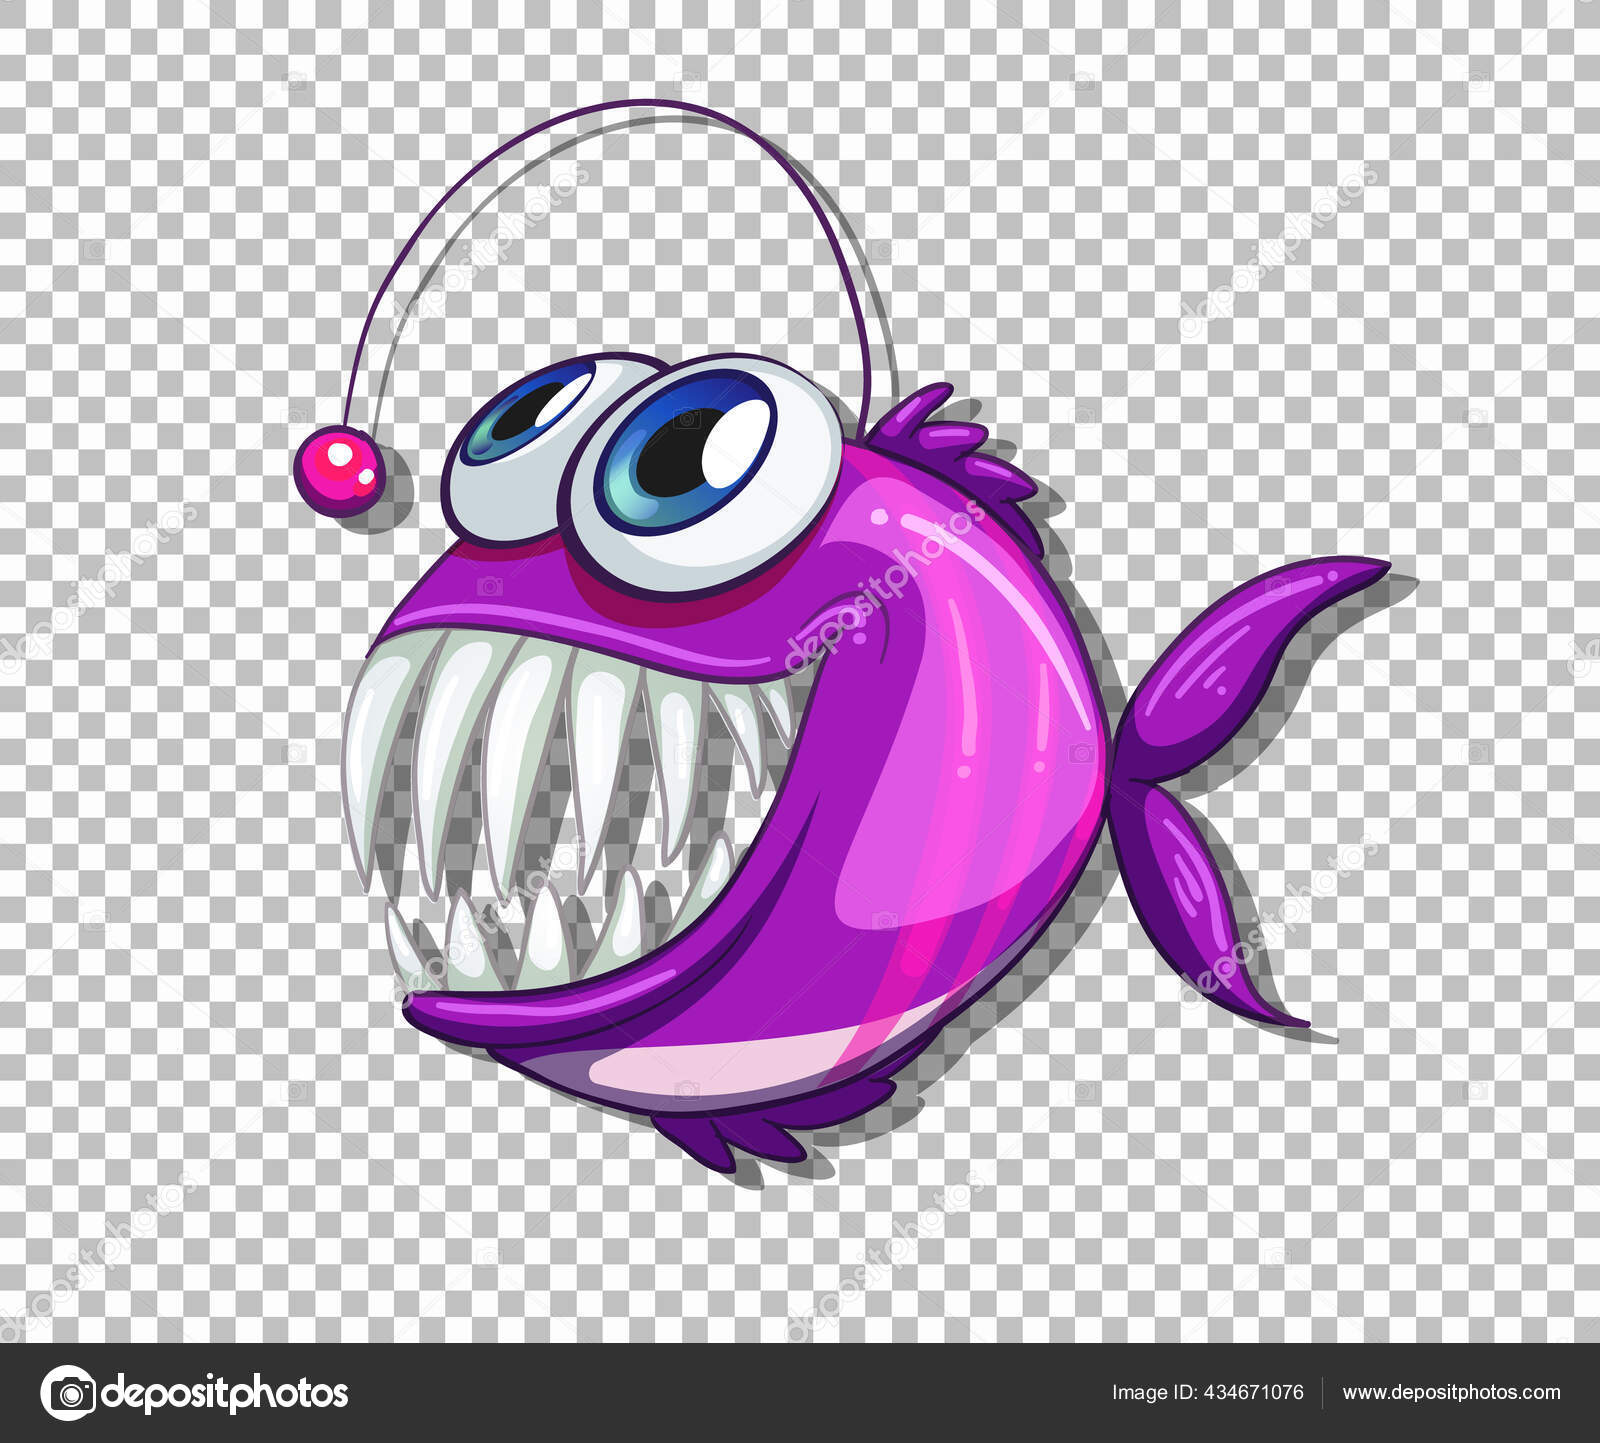 Purple Angler Fish Cartoon Character Transparent Background Illustration  Stock Vector by ©interactimages 434671076